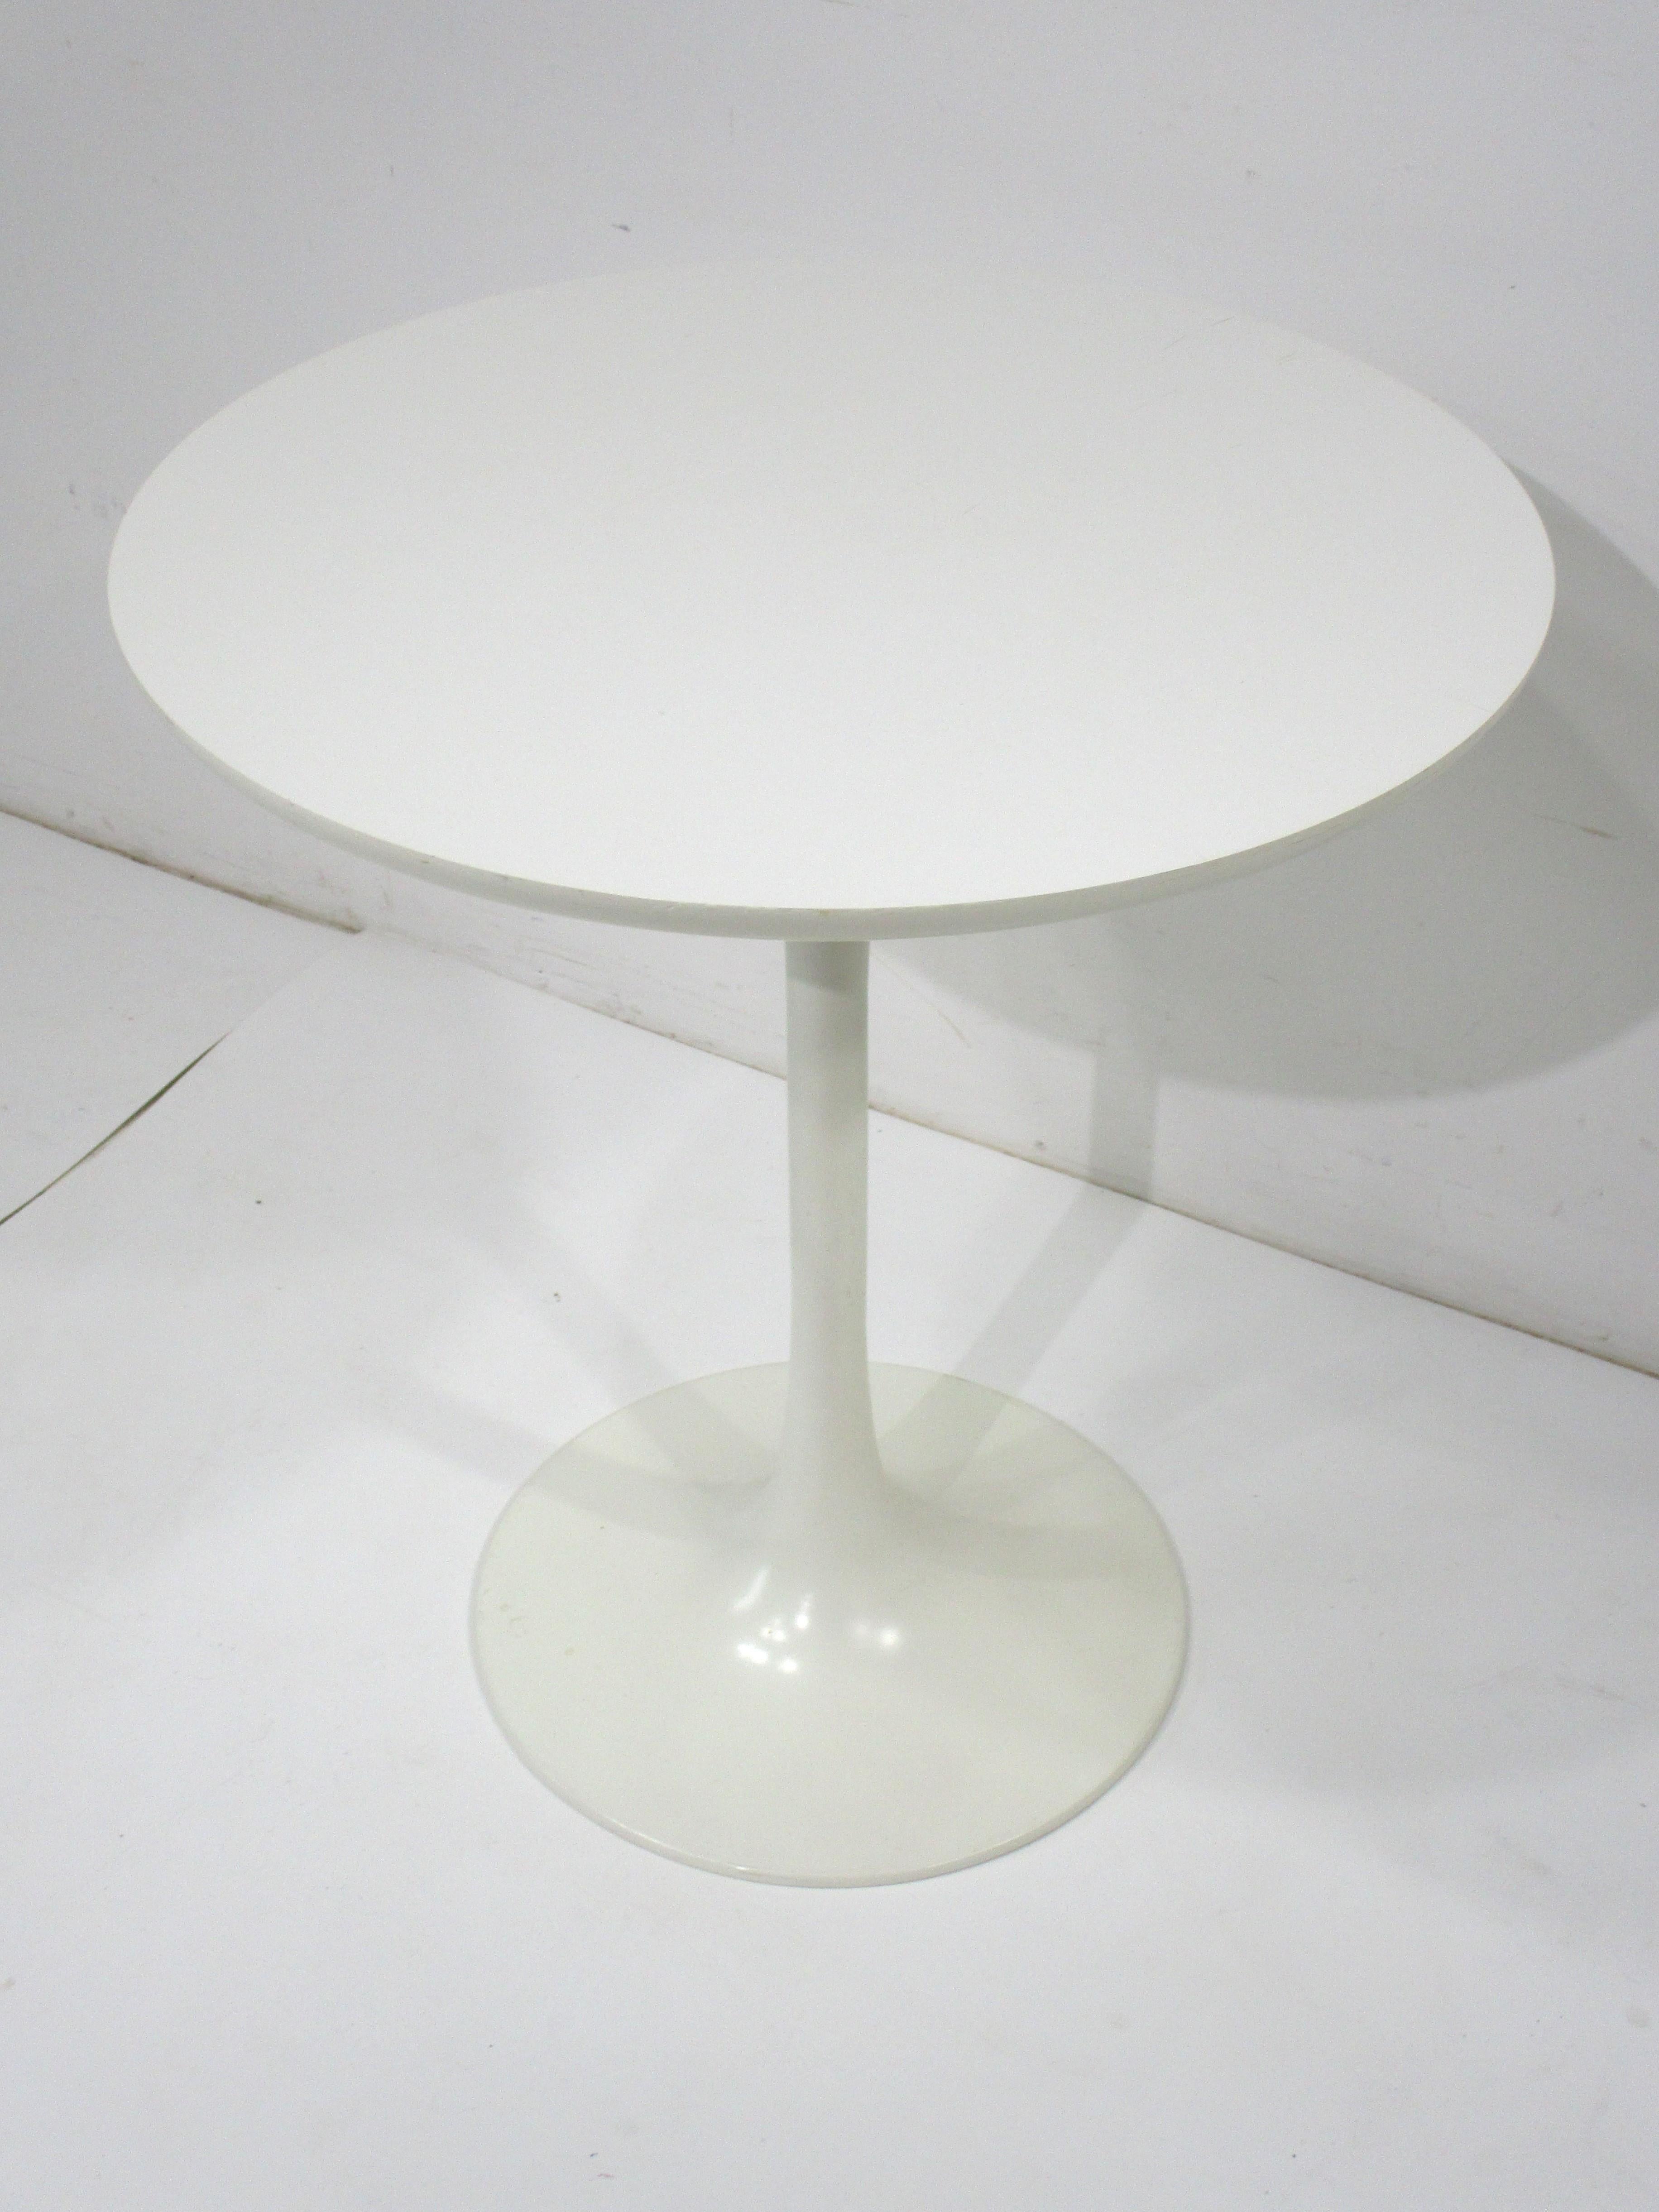 American Taller Tulip Side / Lamp Table by Maurice Burke in the style of Saarinen  For Sale